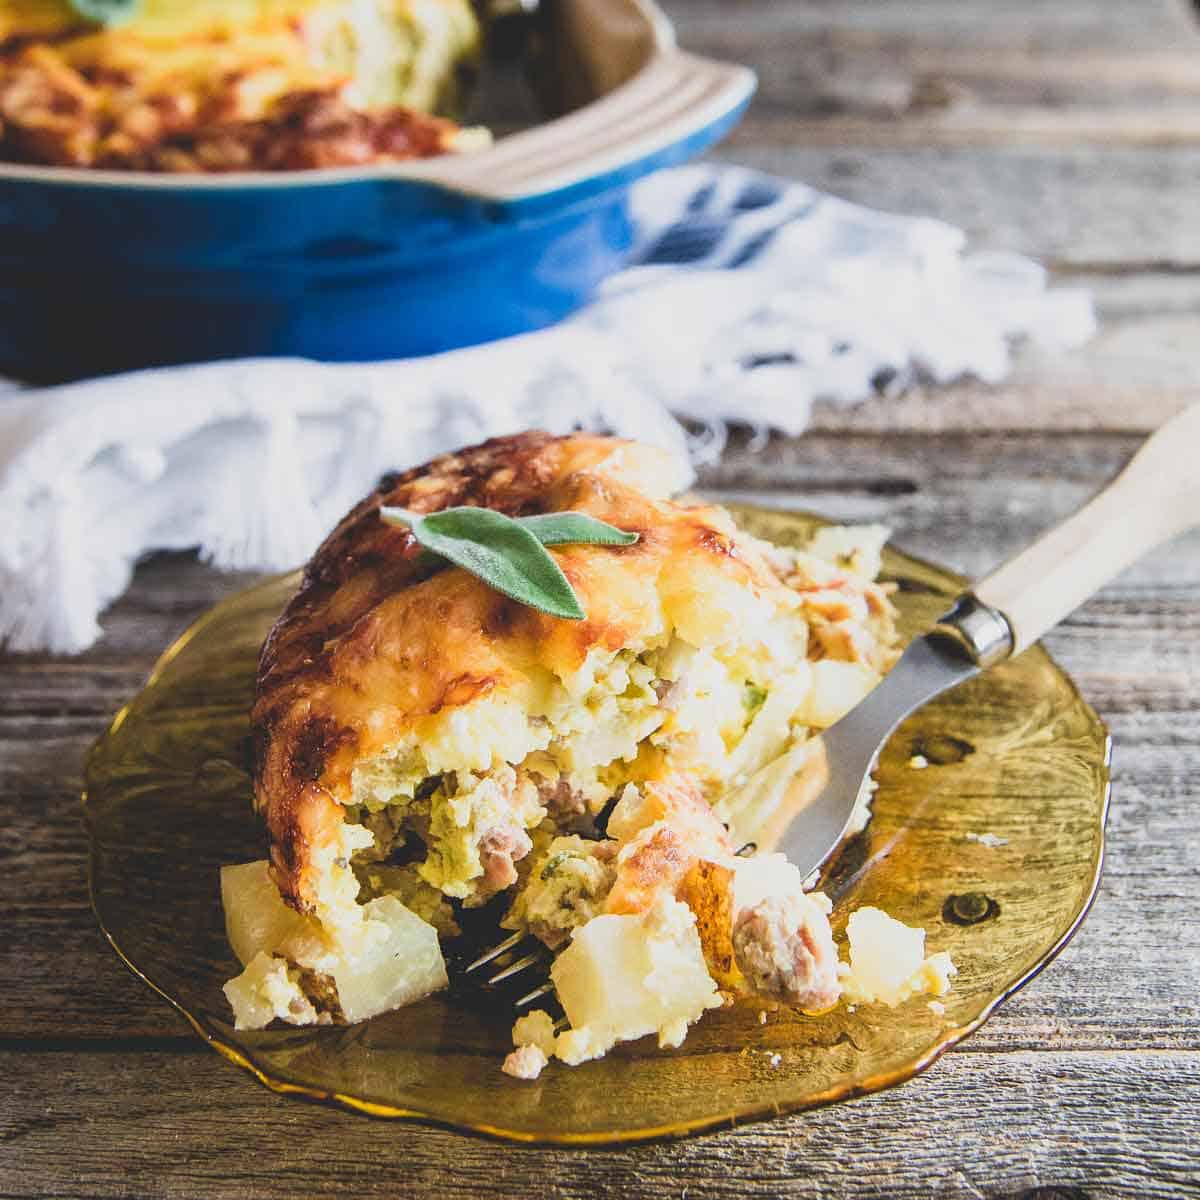 This easy recipe for potato breakfast casserole is hearty and perfect to feed a hungry family on a weekend morning!